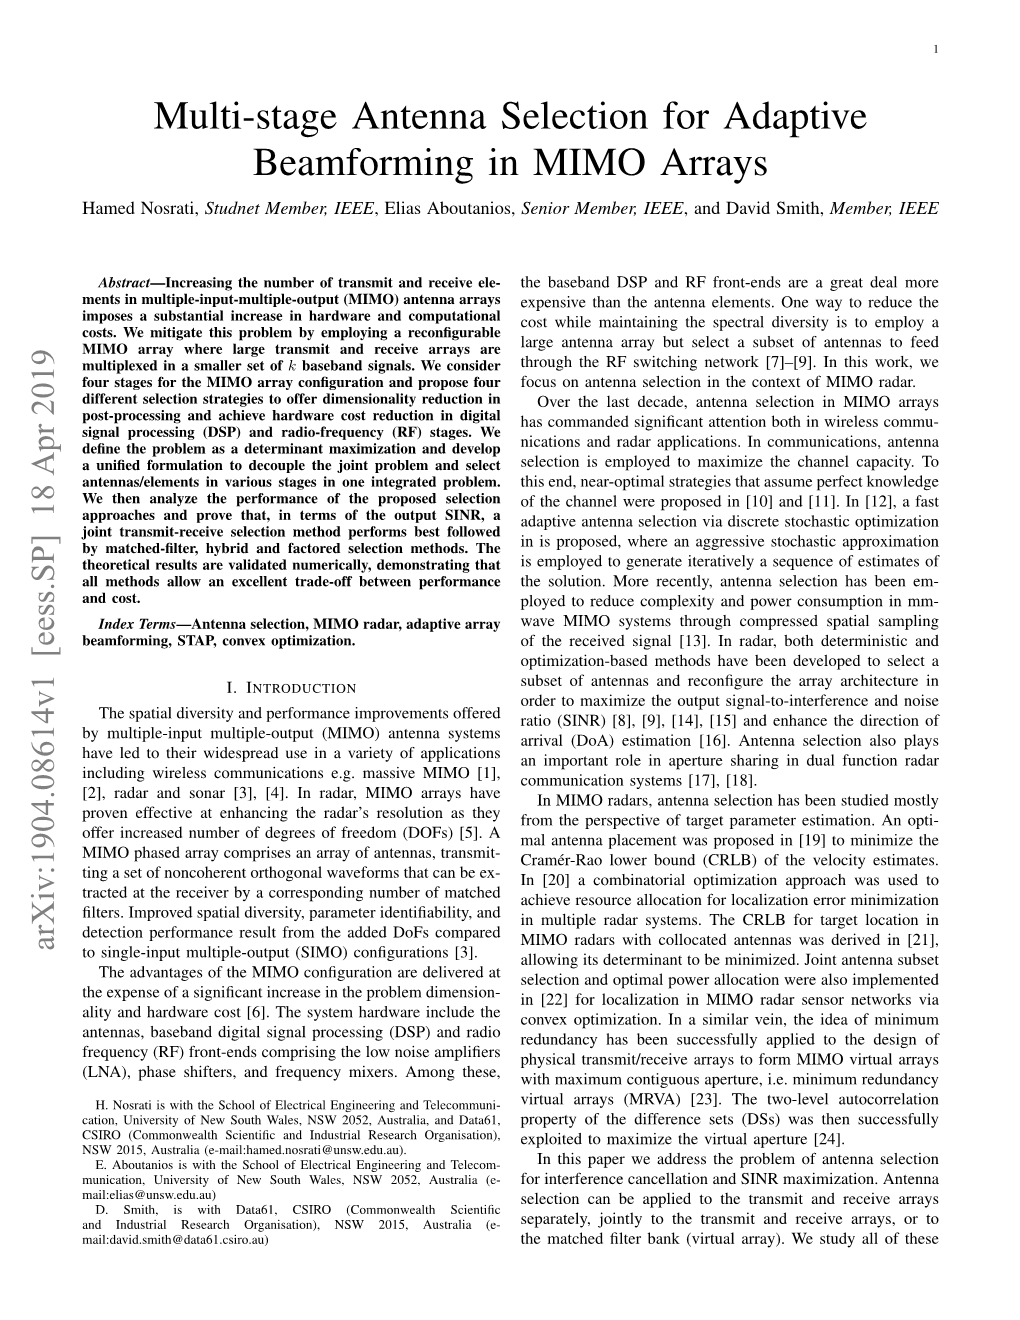 Multi-Stage Antenna Selection for Adaptive Beamforming in MIMO